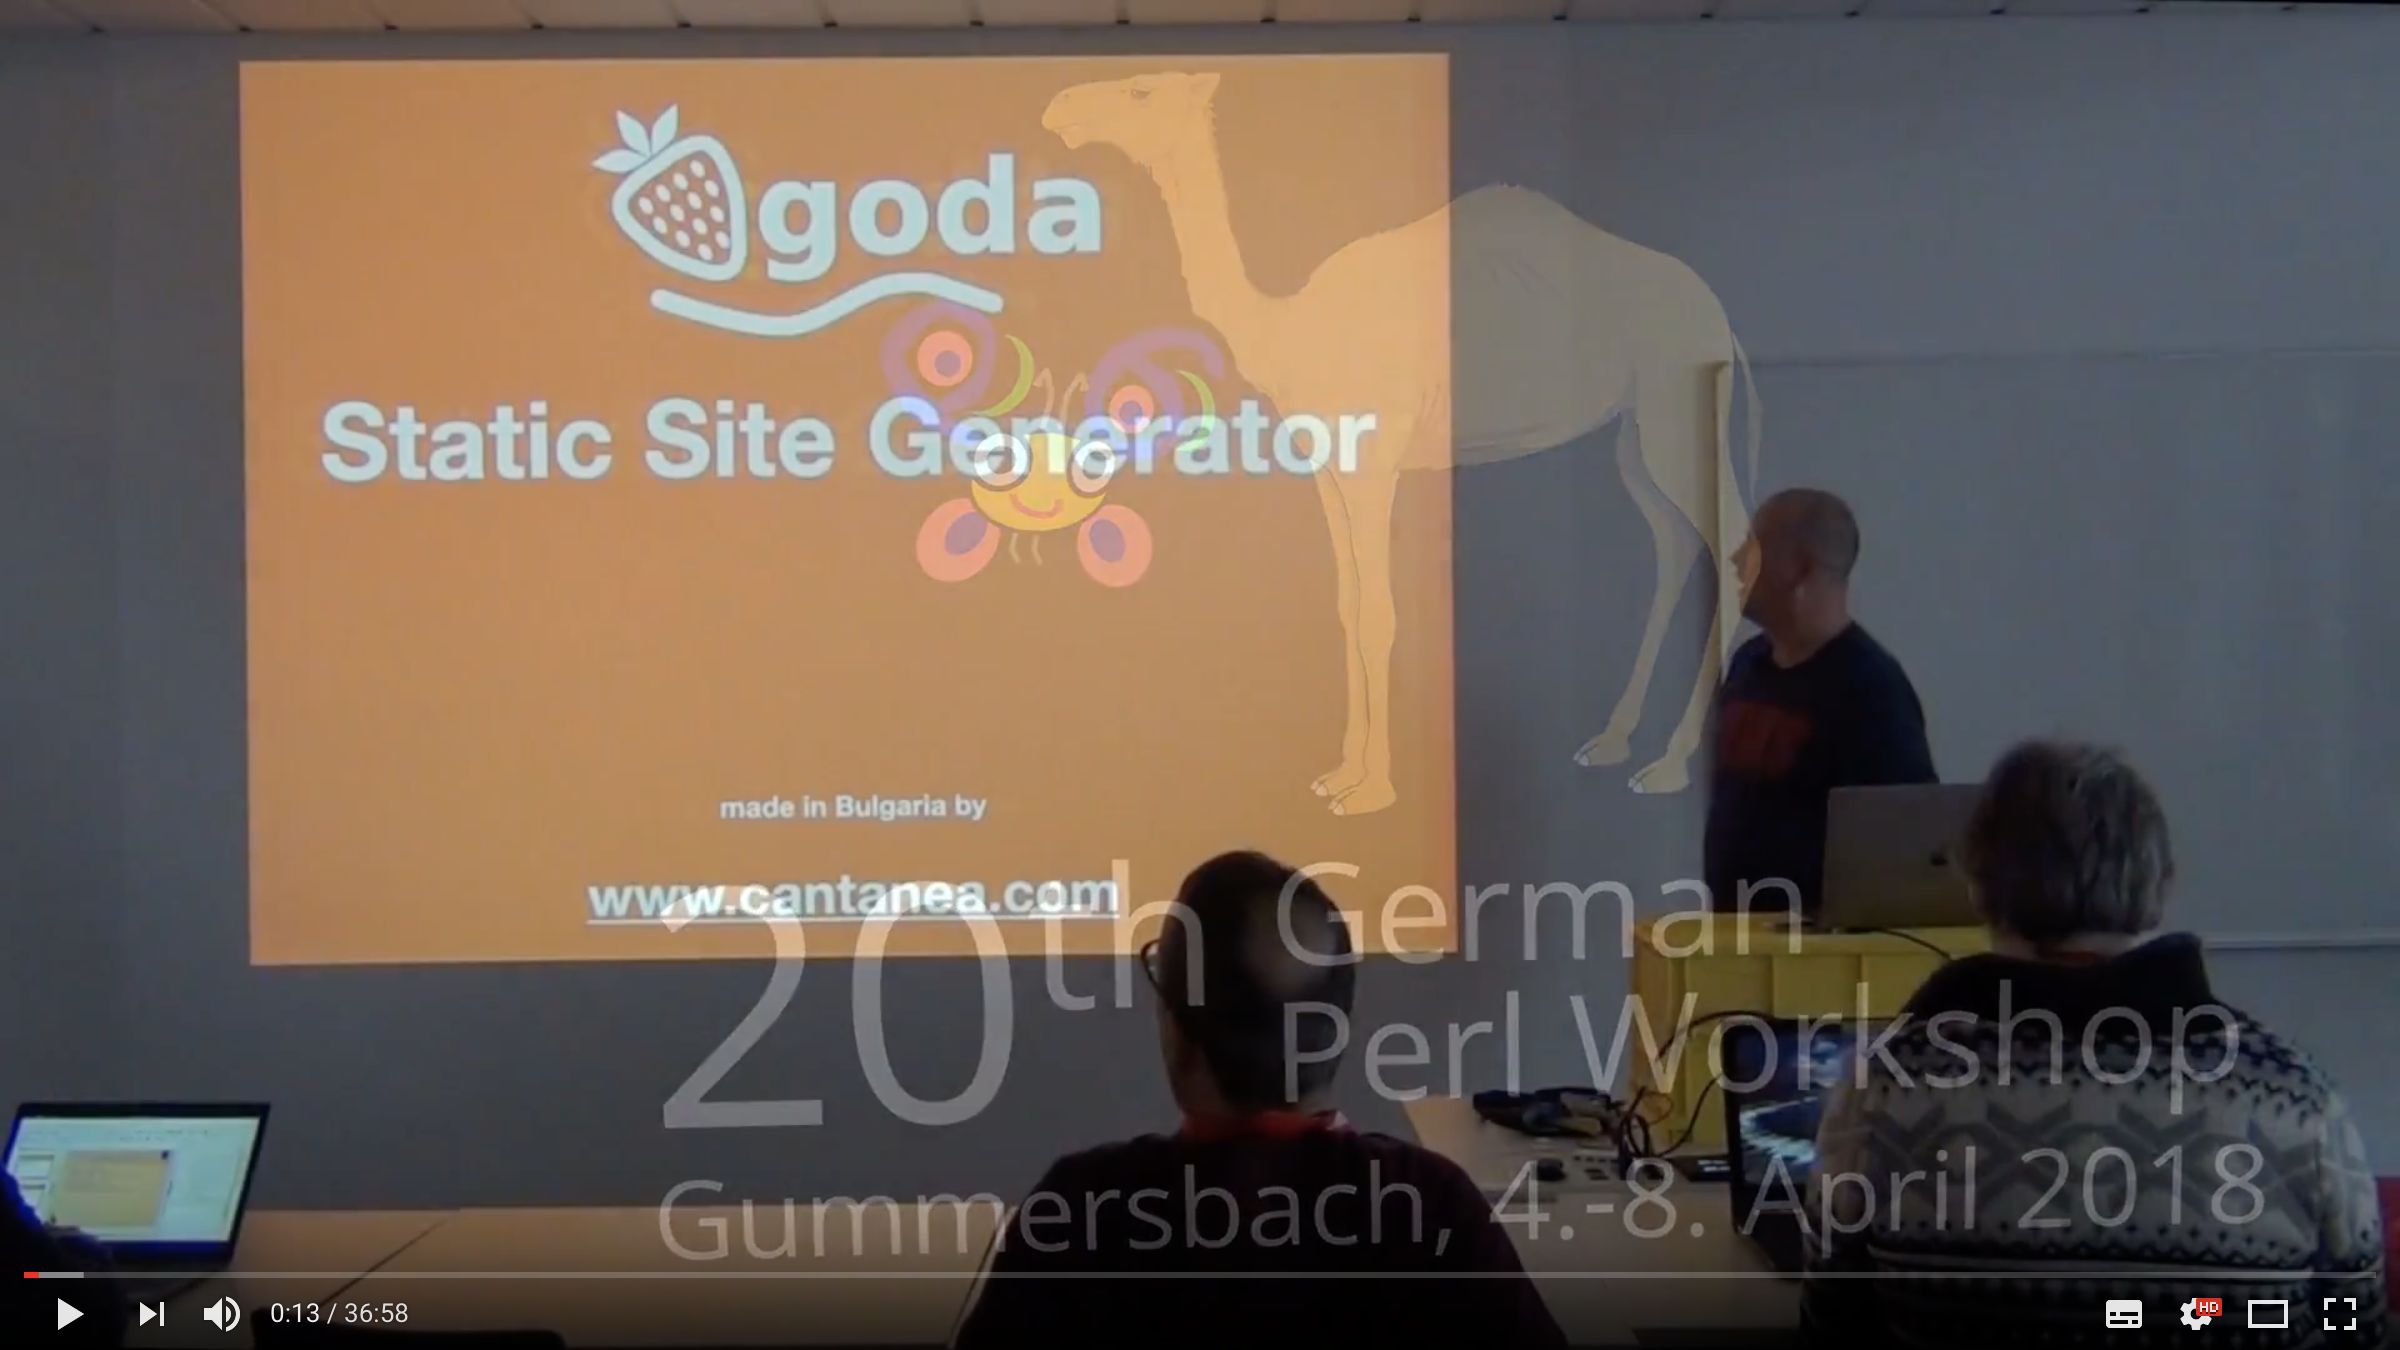 Video of the talk about Qgoda